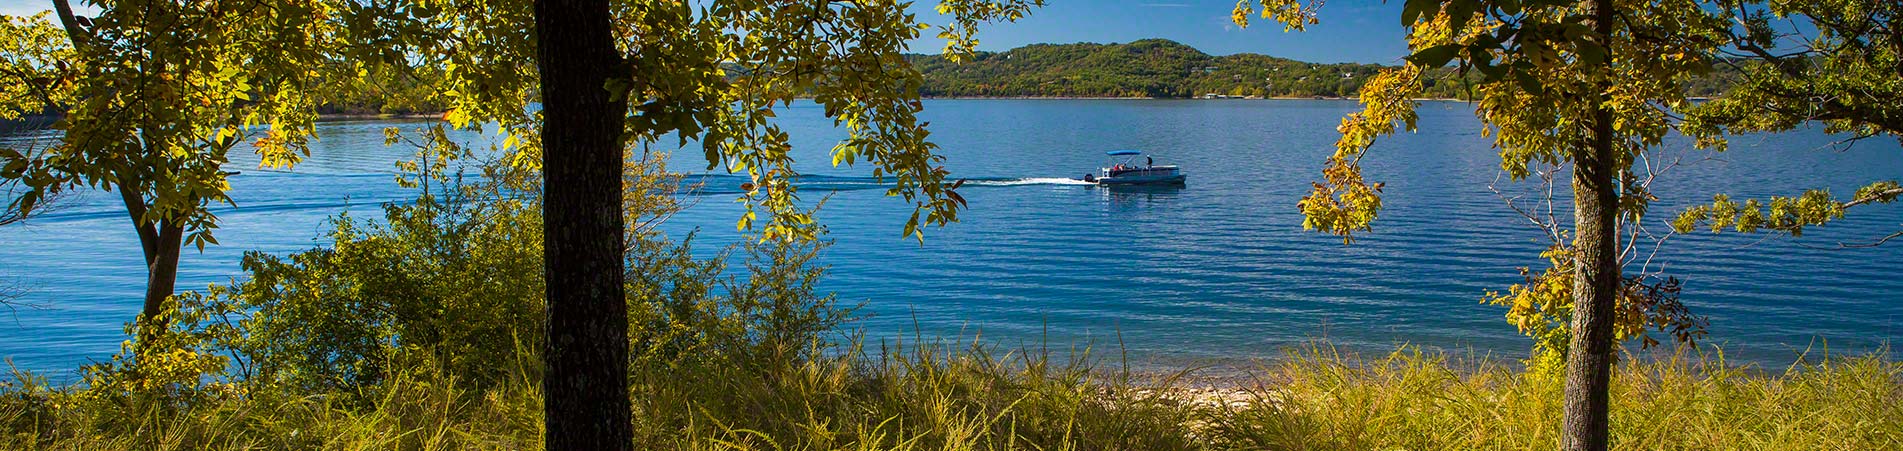 Picture of Table Rock Lake taken by one of our very own realtors in Branson, MO.